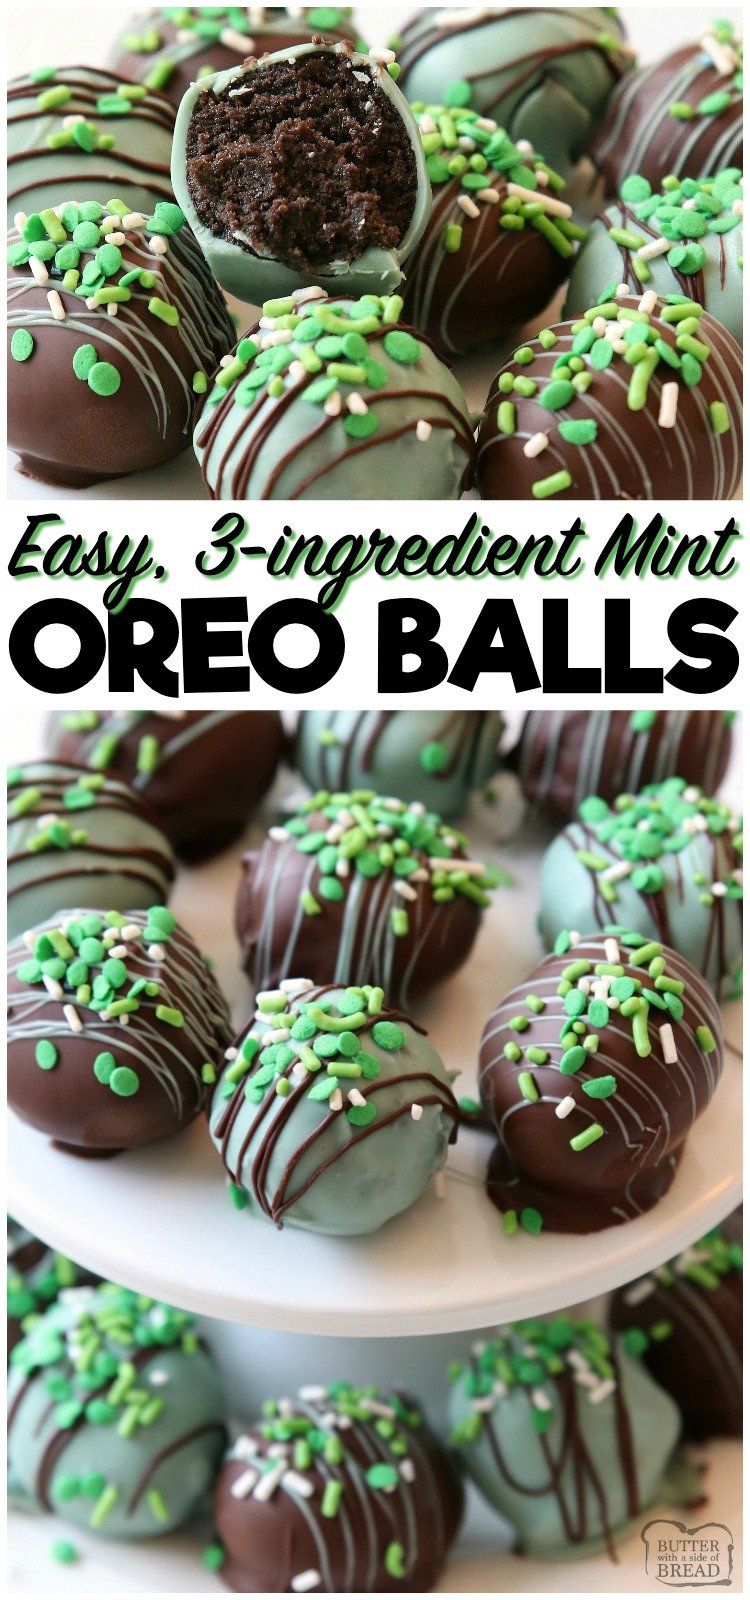 Mint Oreo Balls made with just 3 ingredients & perfect for St. Patrick's Day! Made in minutes and so delicious, no one can guess they’re made with Oreo cookies! #oreo #mint #green #cookies #truffles #chocolate #Stpatricksday #candy #easy #recipe #dessert from BUTTER WITH A SIDE OF BREAD